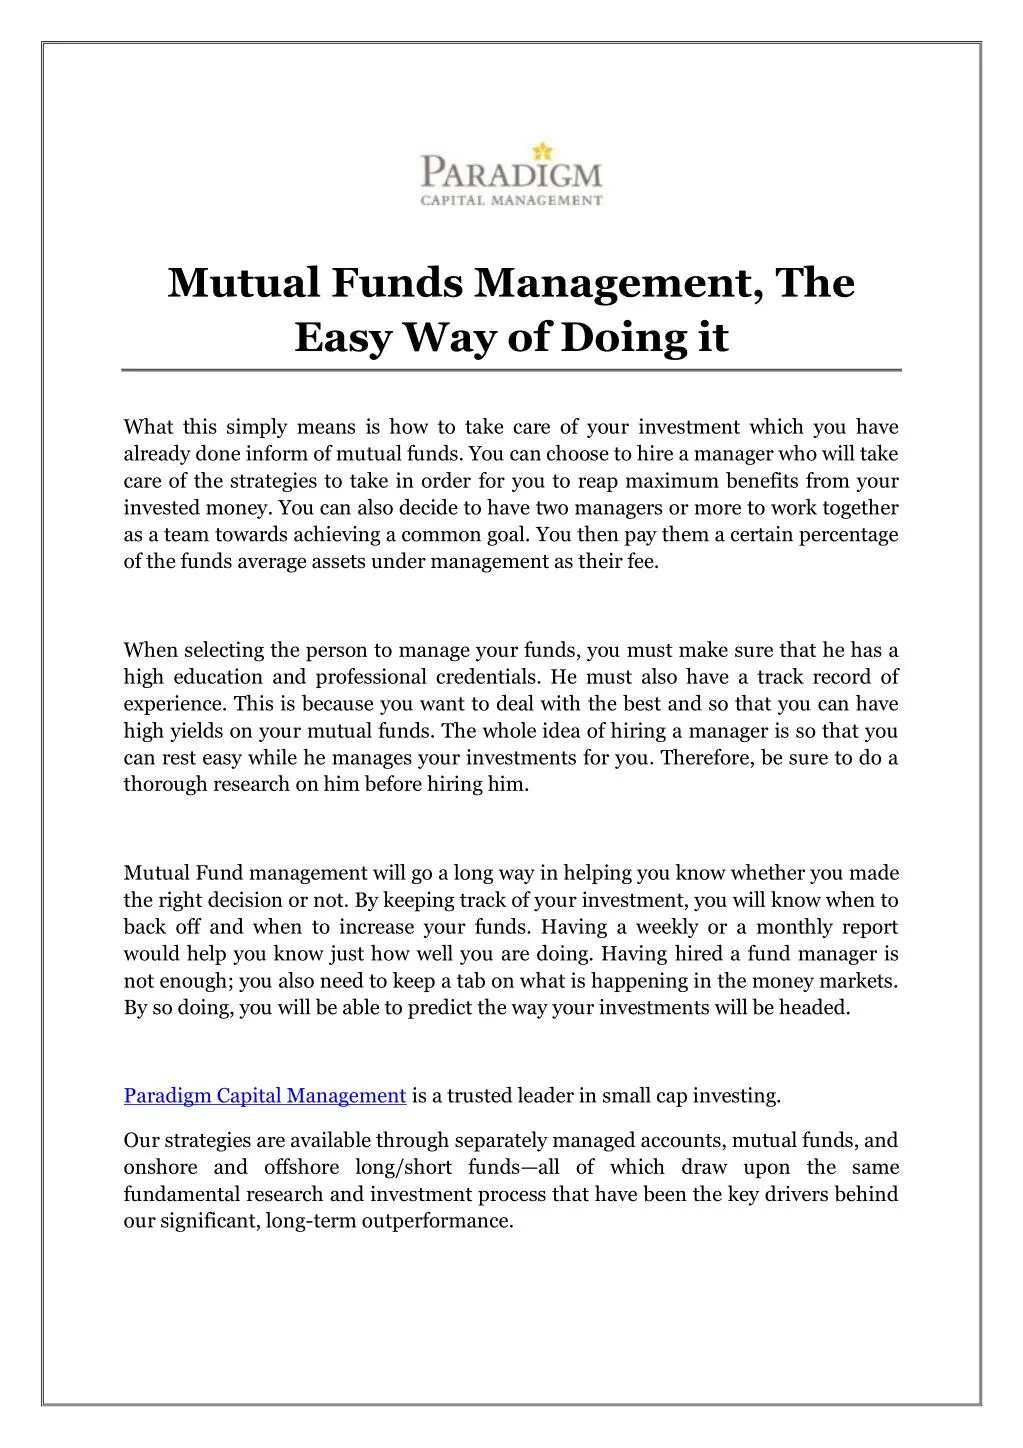 mutual funds management the easy way of doing it